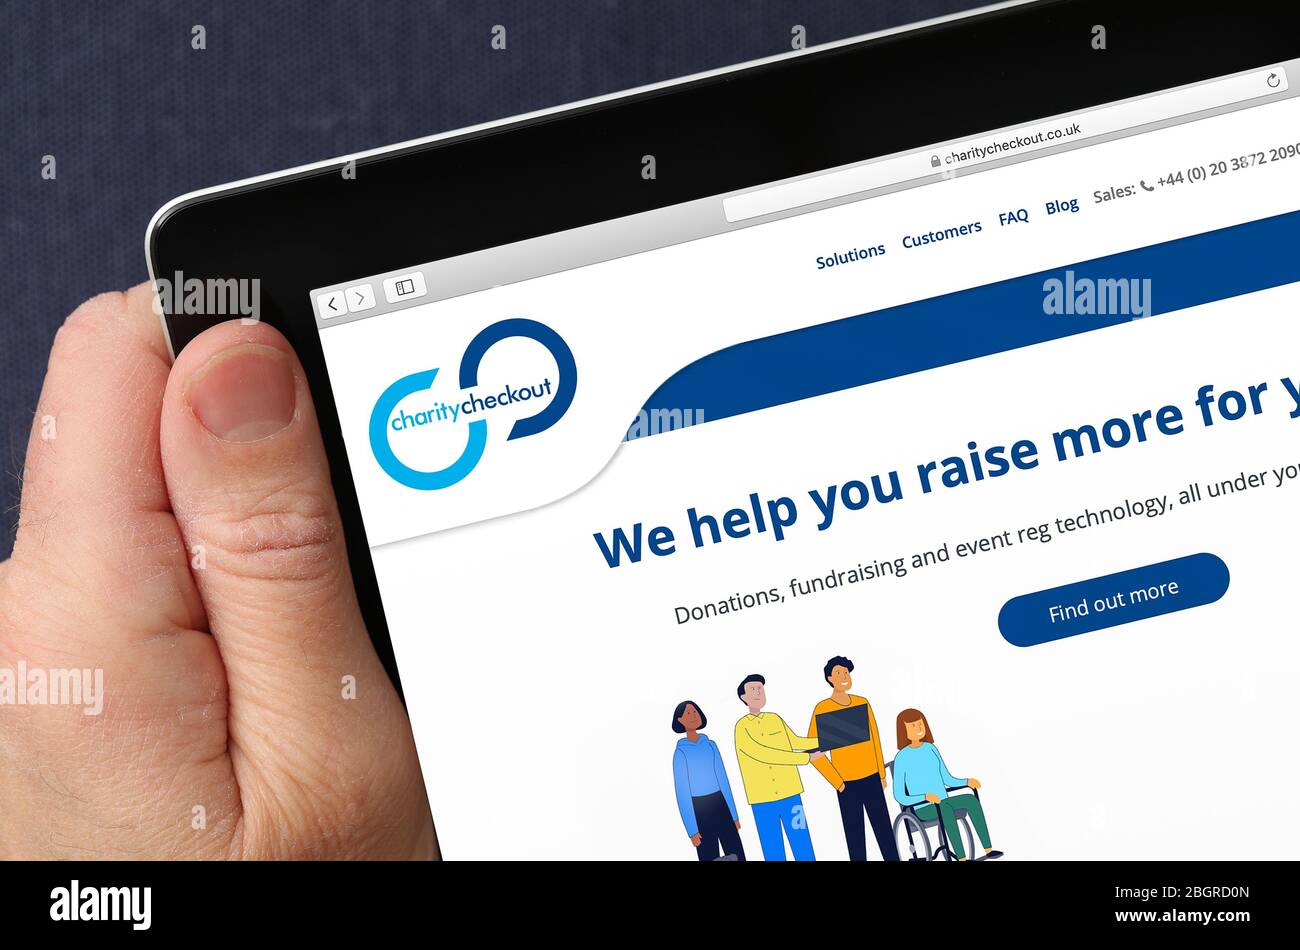 Charity Checkout fundraising website viewed on an iPad Stock Photo